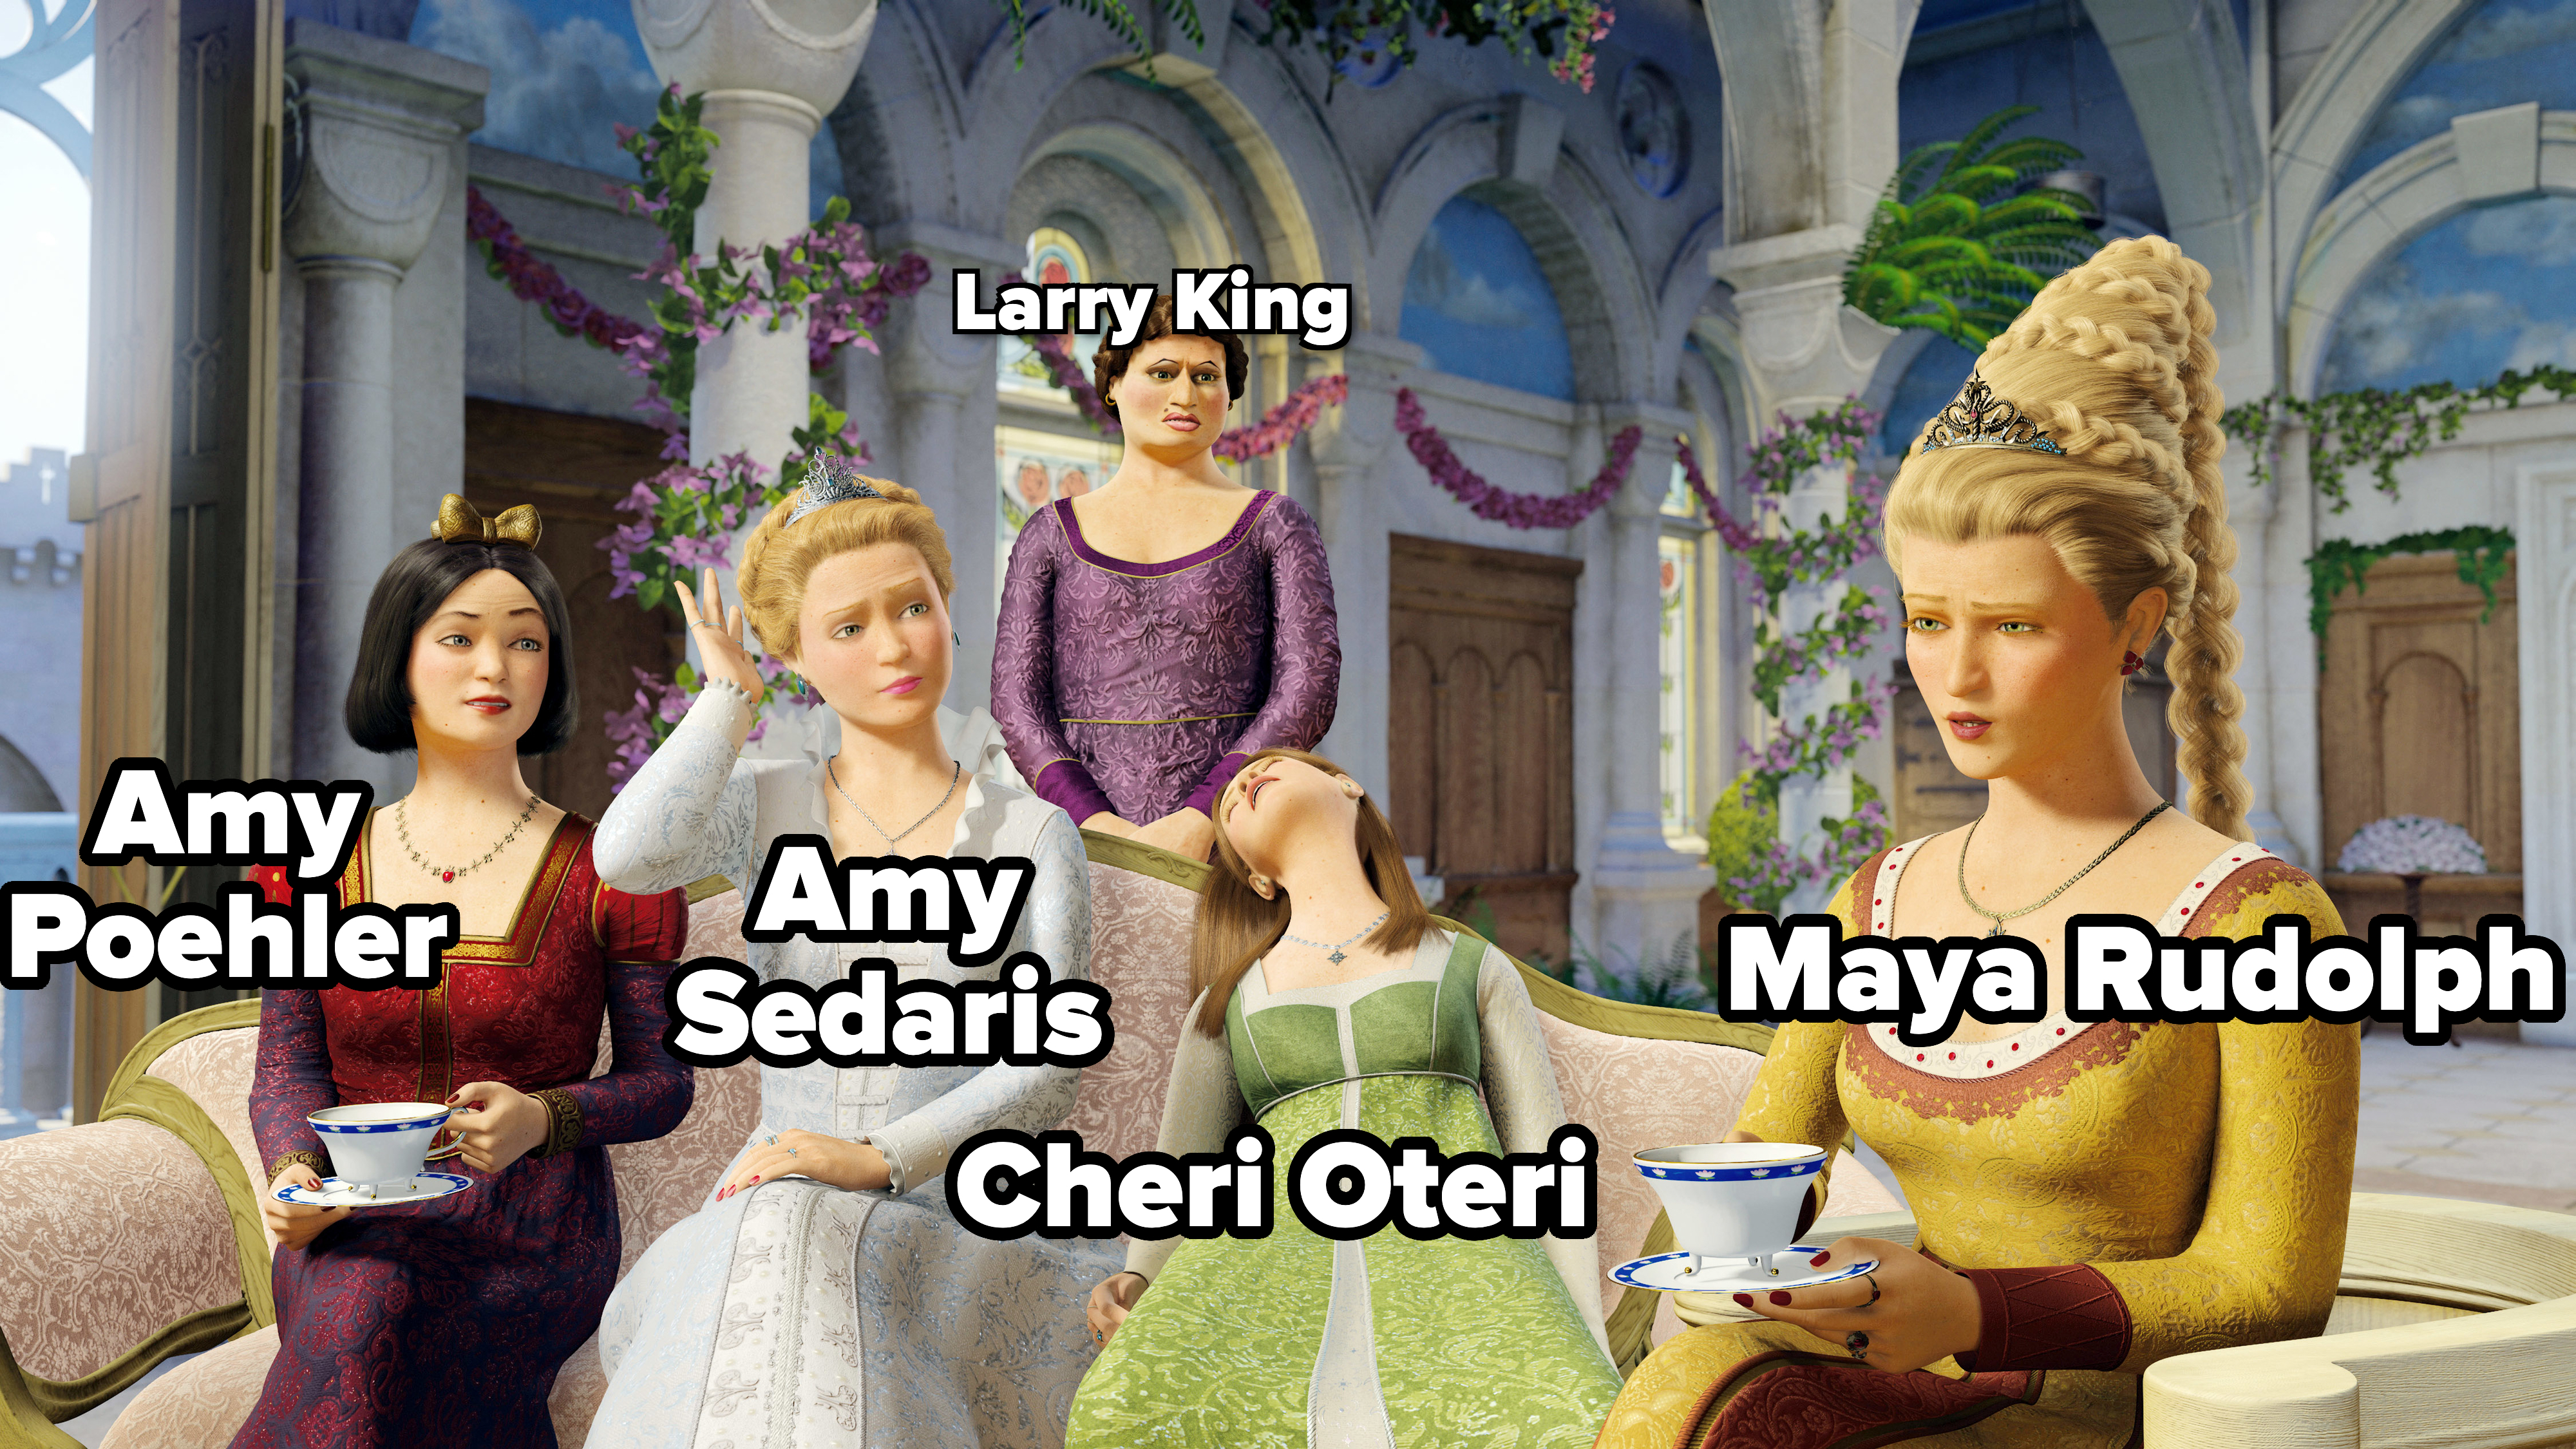 Screenshot from Shrek the Third showing the female characters voiced by Amy Poehler, Amy Sedaris, Cheri Oteri, Maya Rudolph, and Larry King